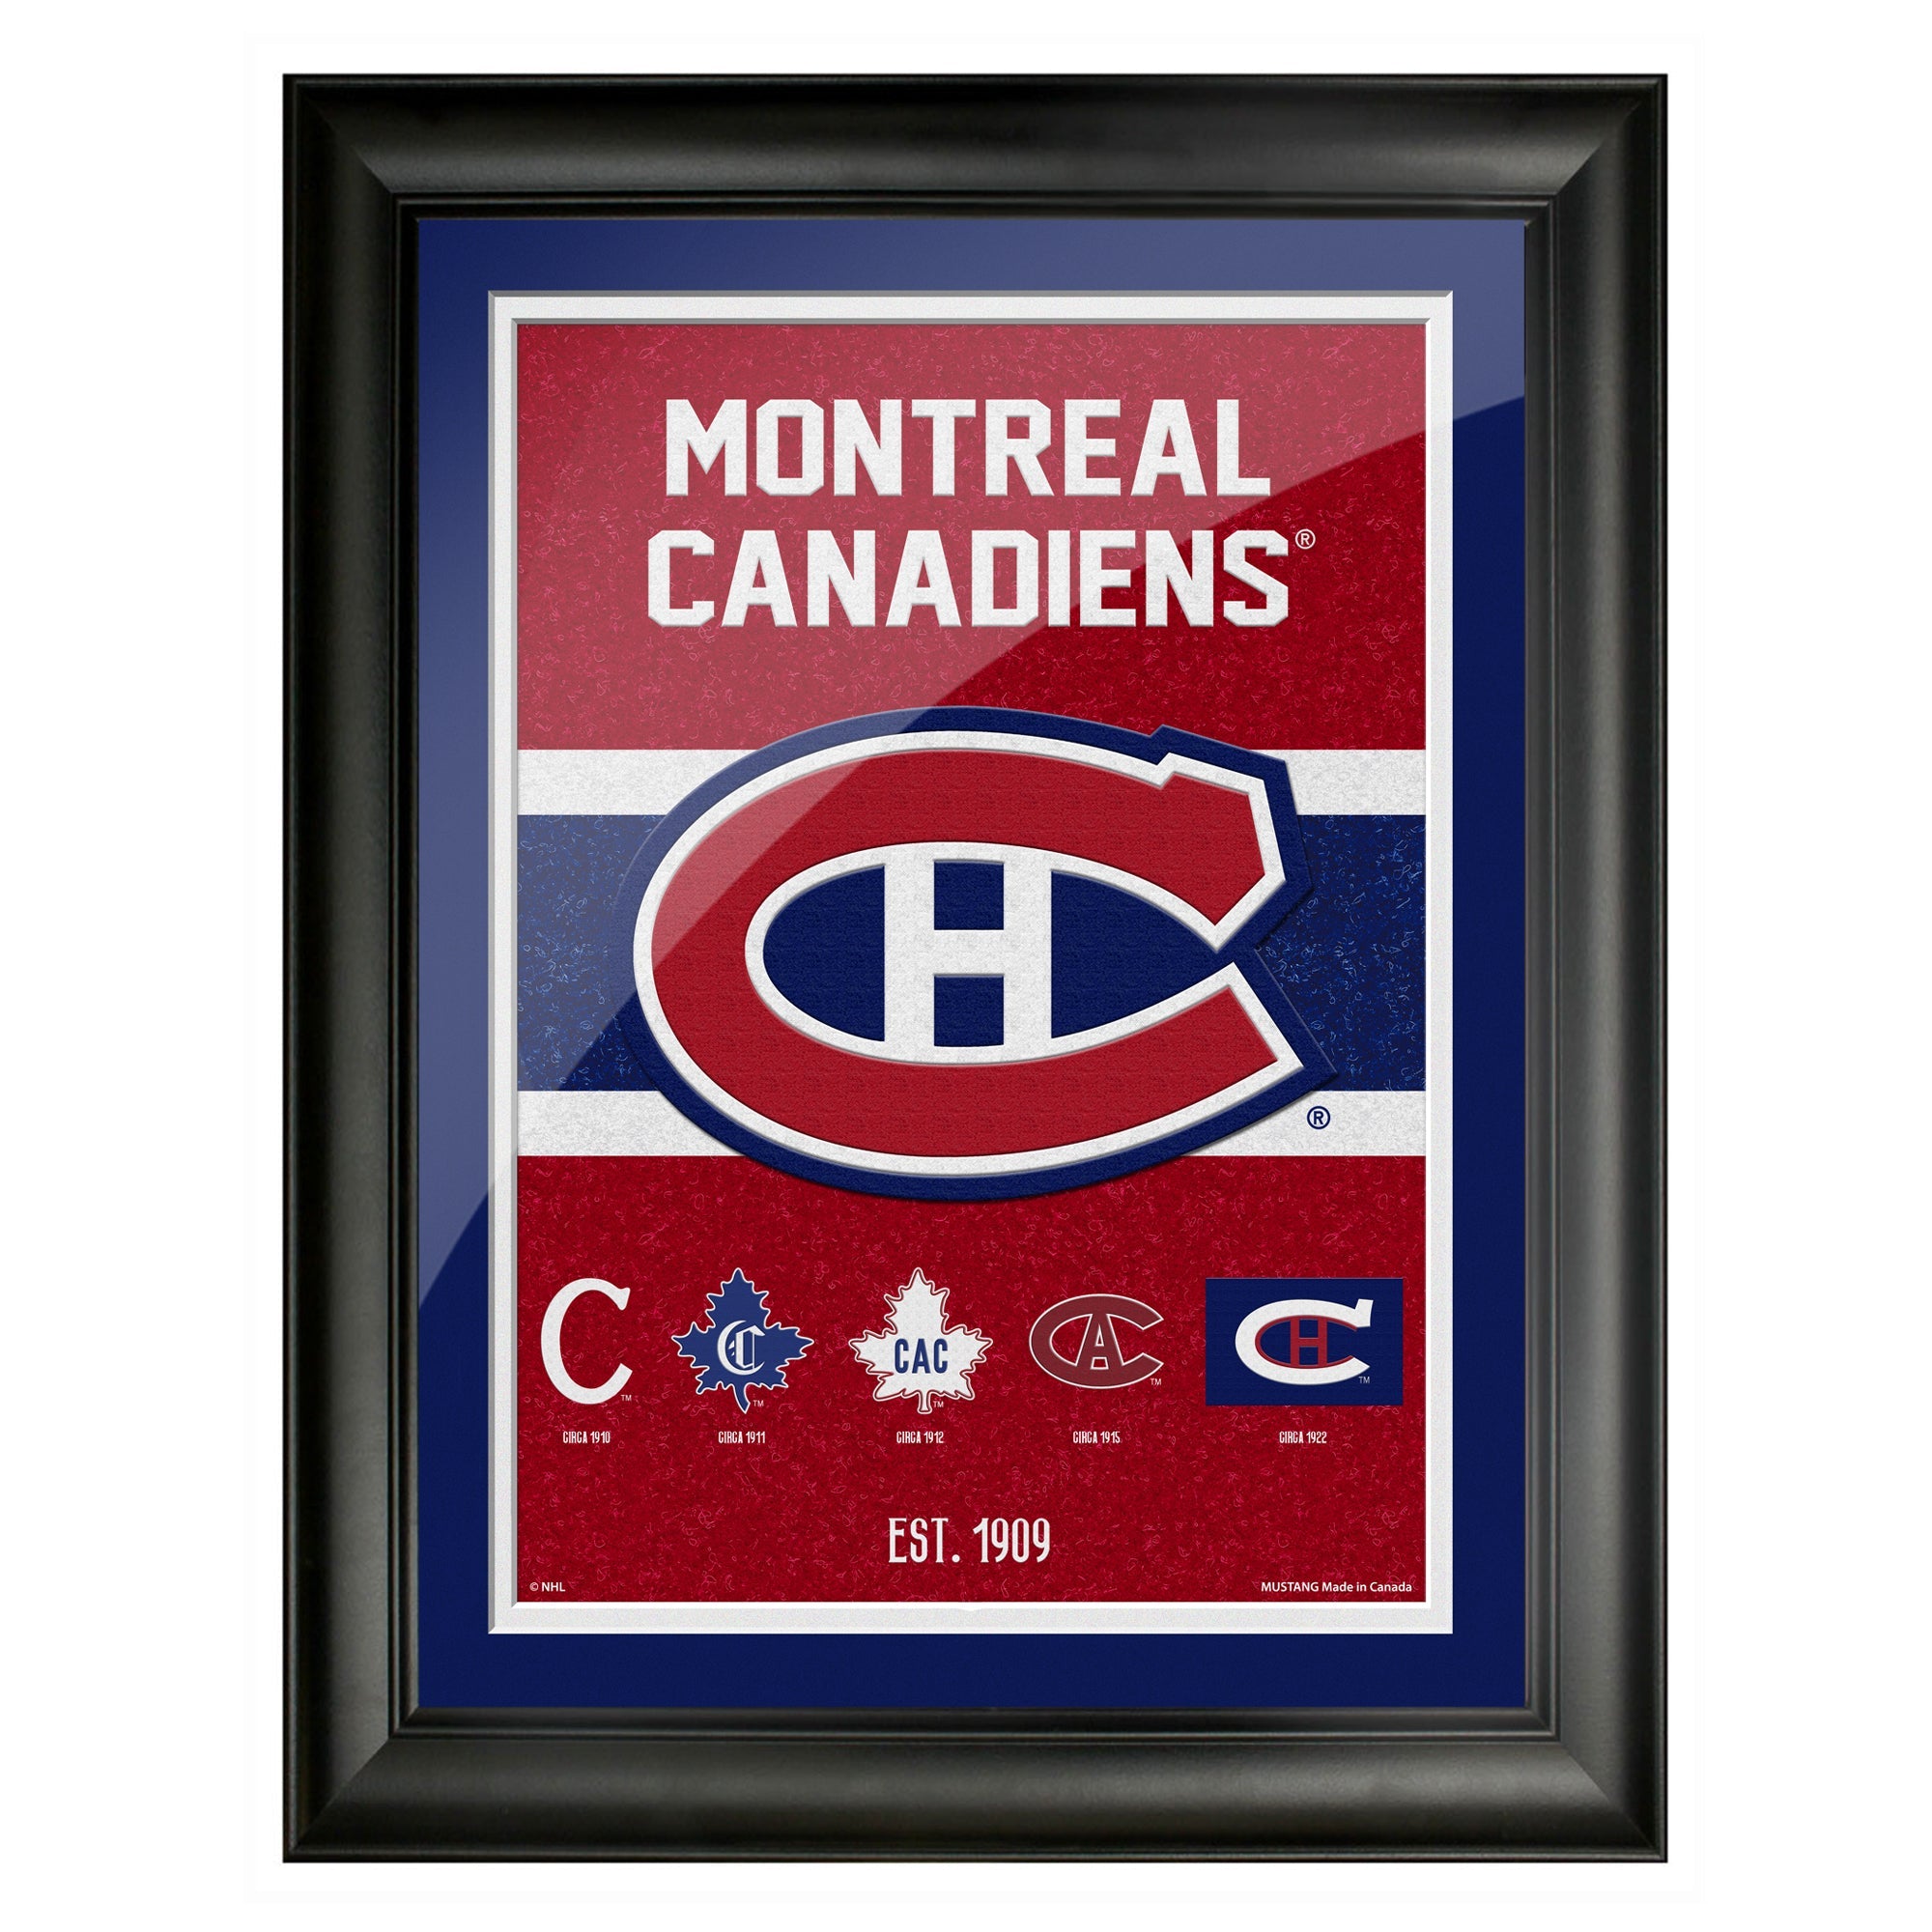 Montreal Canadiens 12x16 Team Tradition Framed Artwork